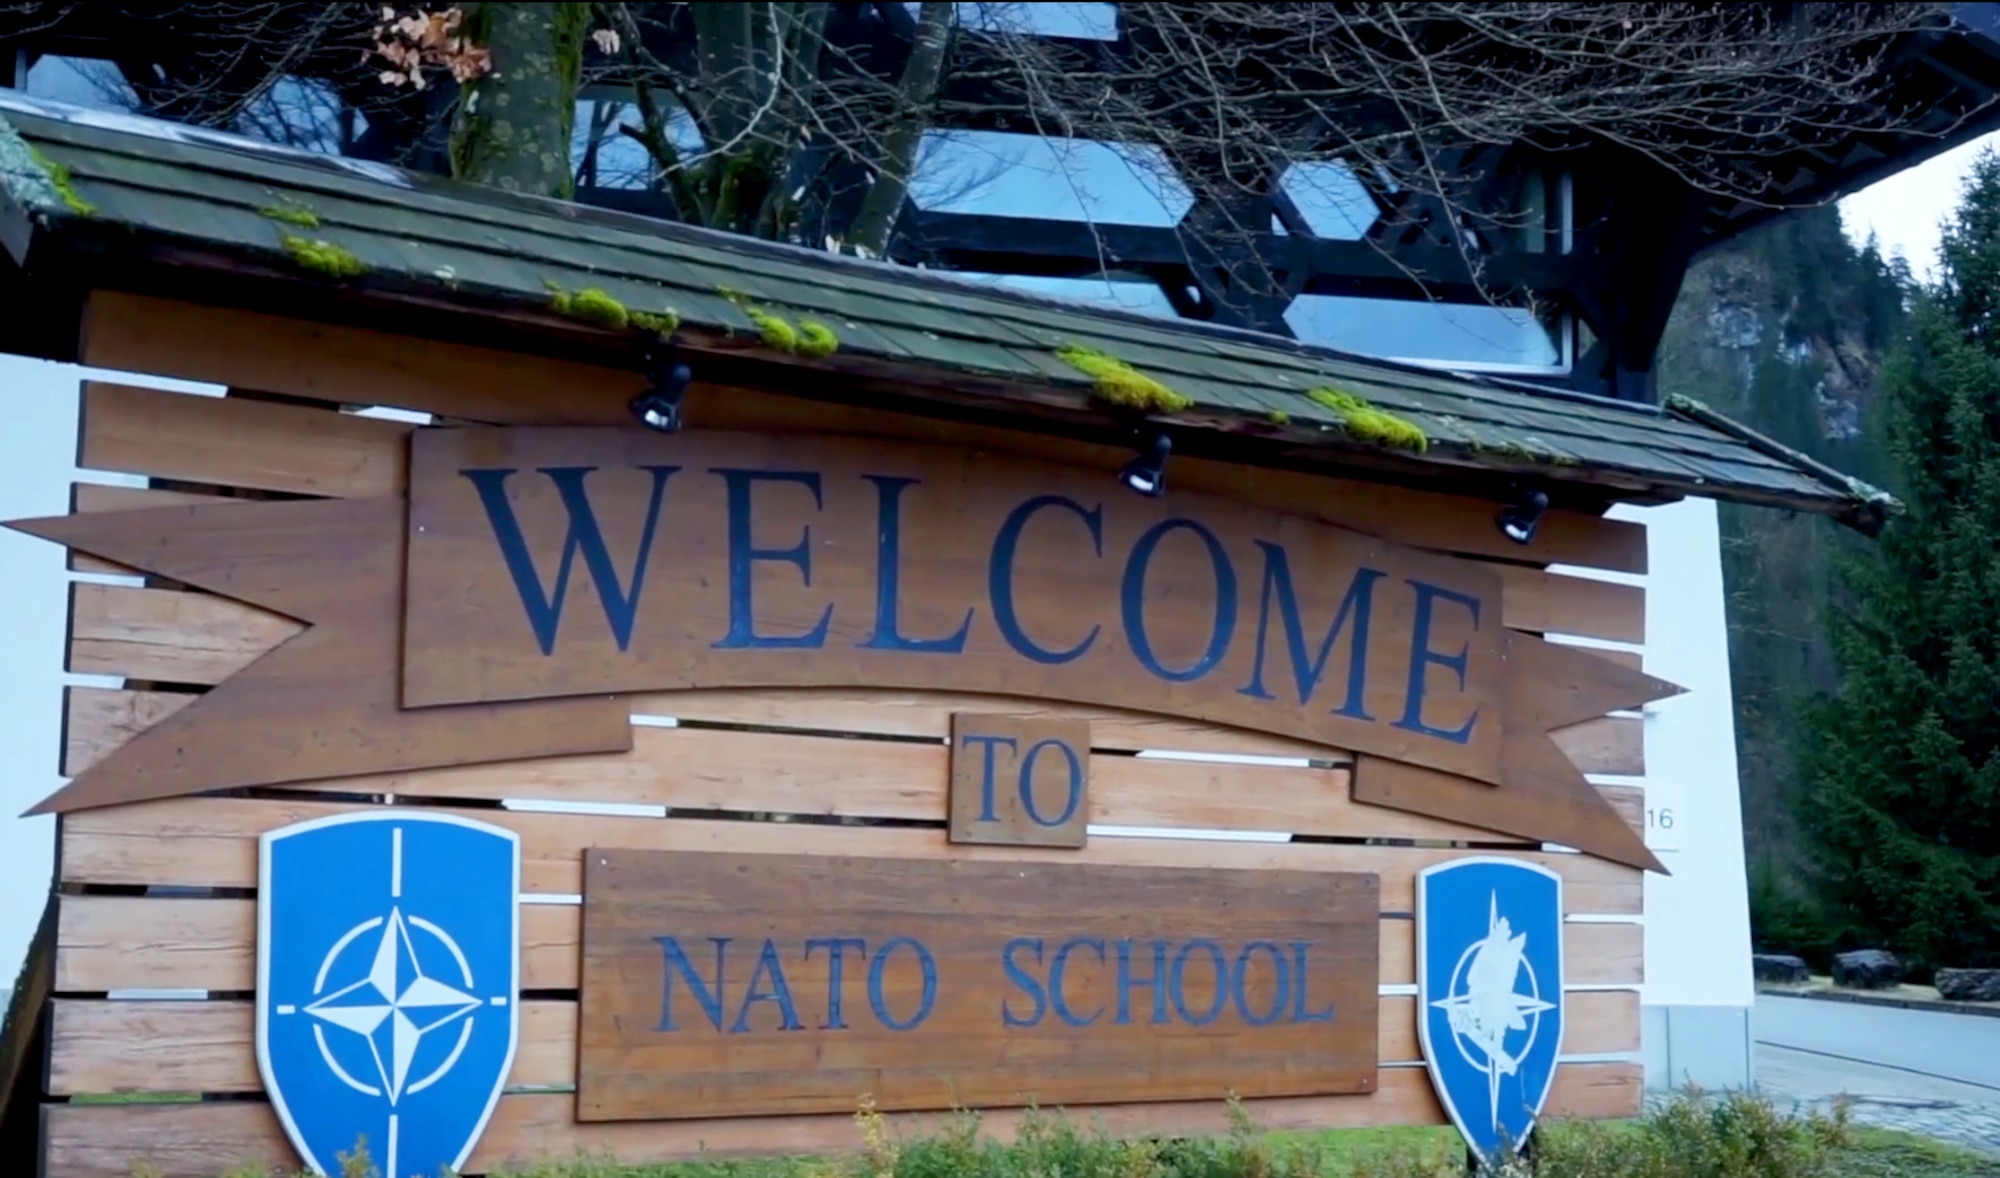 A welcome sign greets Air Force Instructors traveling to Oberammergau, Germany, while they provide space expertise to the NATO School in March, 2018.